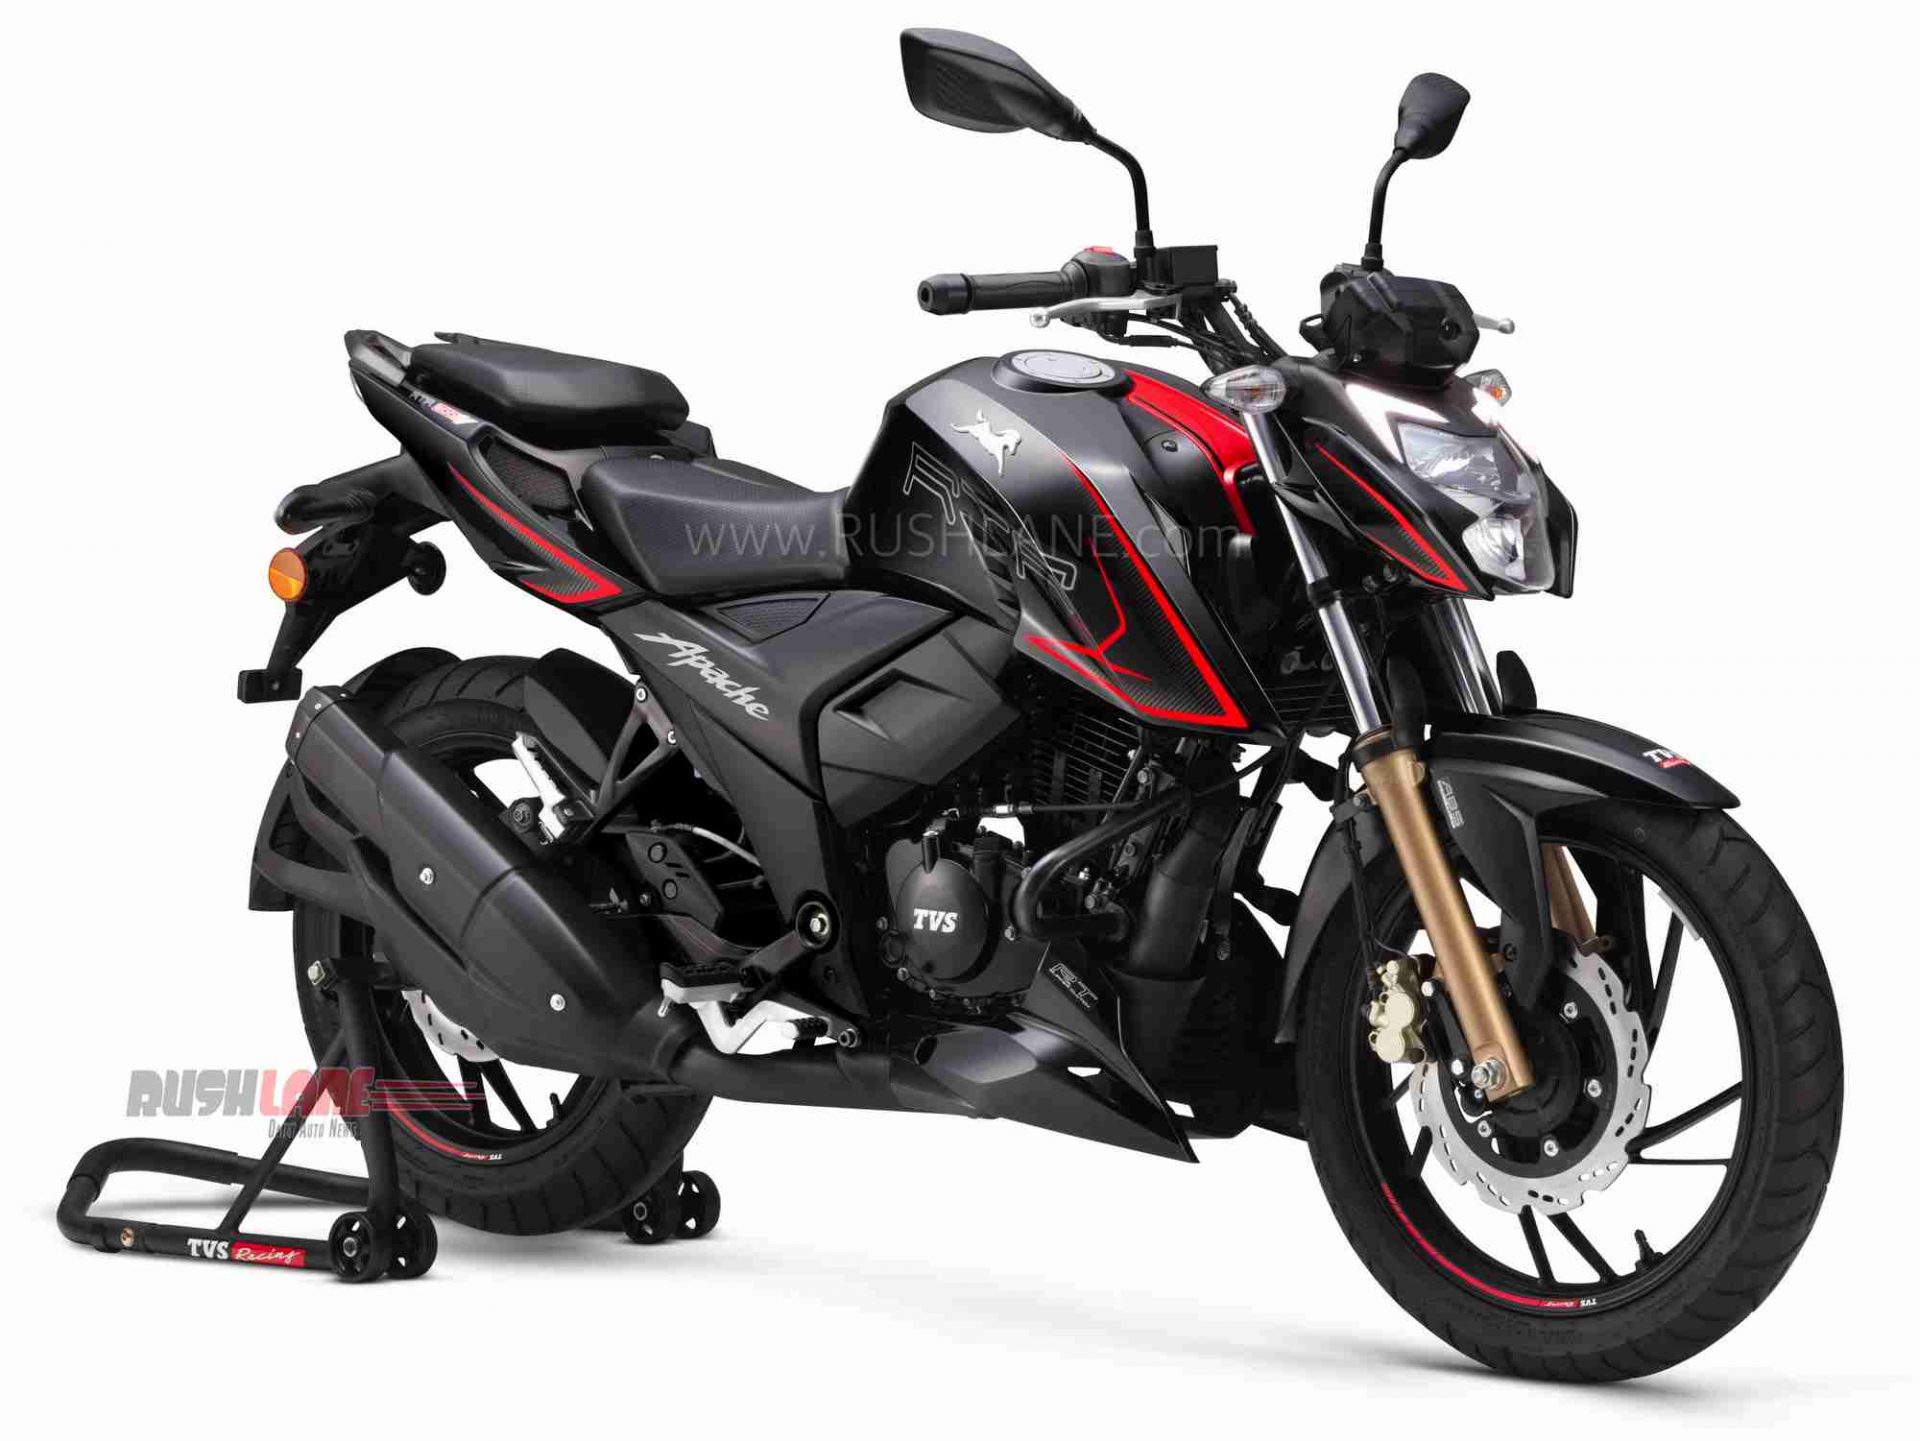 2020 Tvs Apache 200 Bs6 Launch Price Rs 1 24 Lakhs Tvc Video